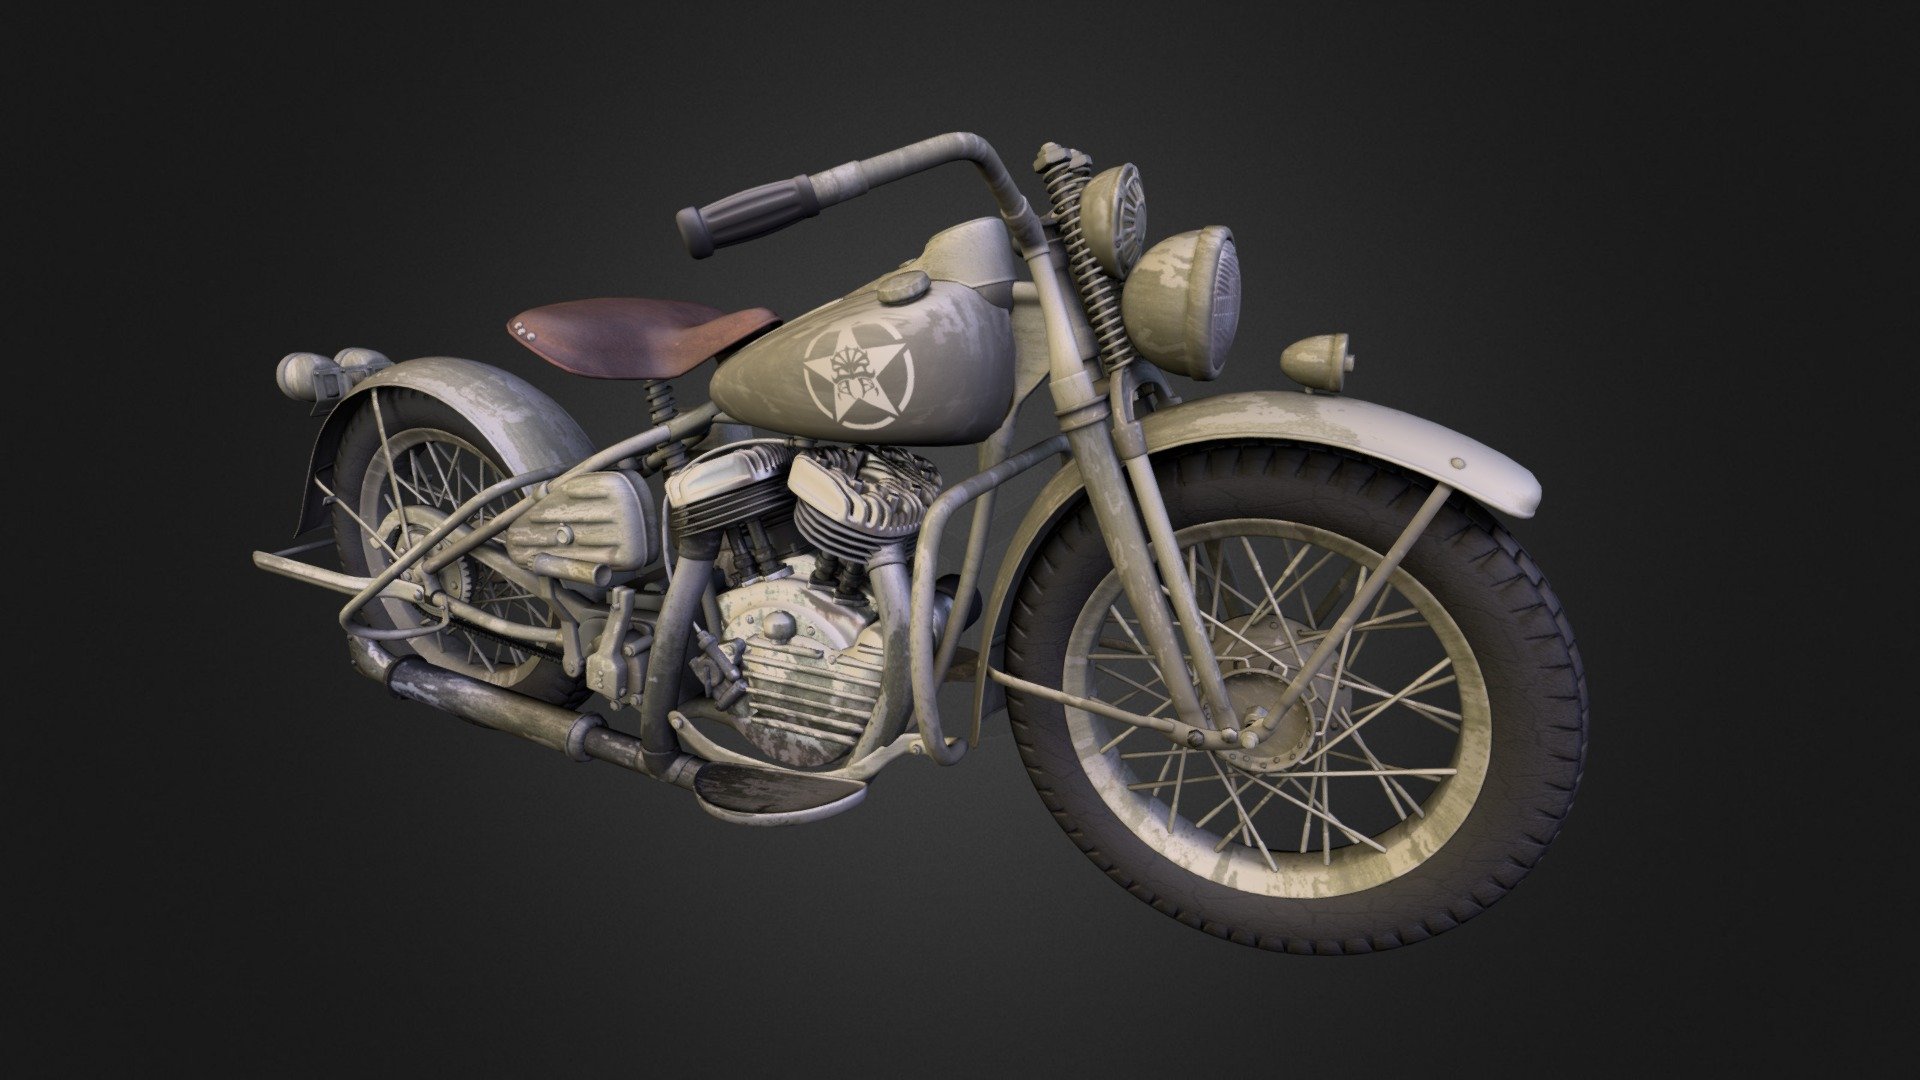 An old school military motorcycle from the WW2 era based on Harley Davidson WLA. Modeled from scratch using Maya 2014. Textures baked using Blender Cycles. One of my own personal projects focusing on hard surface modeling 3d model